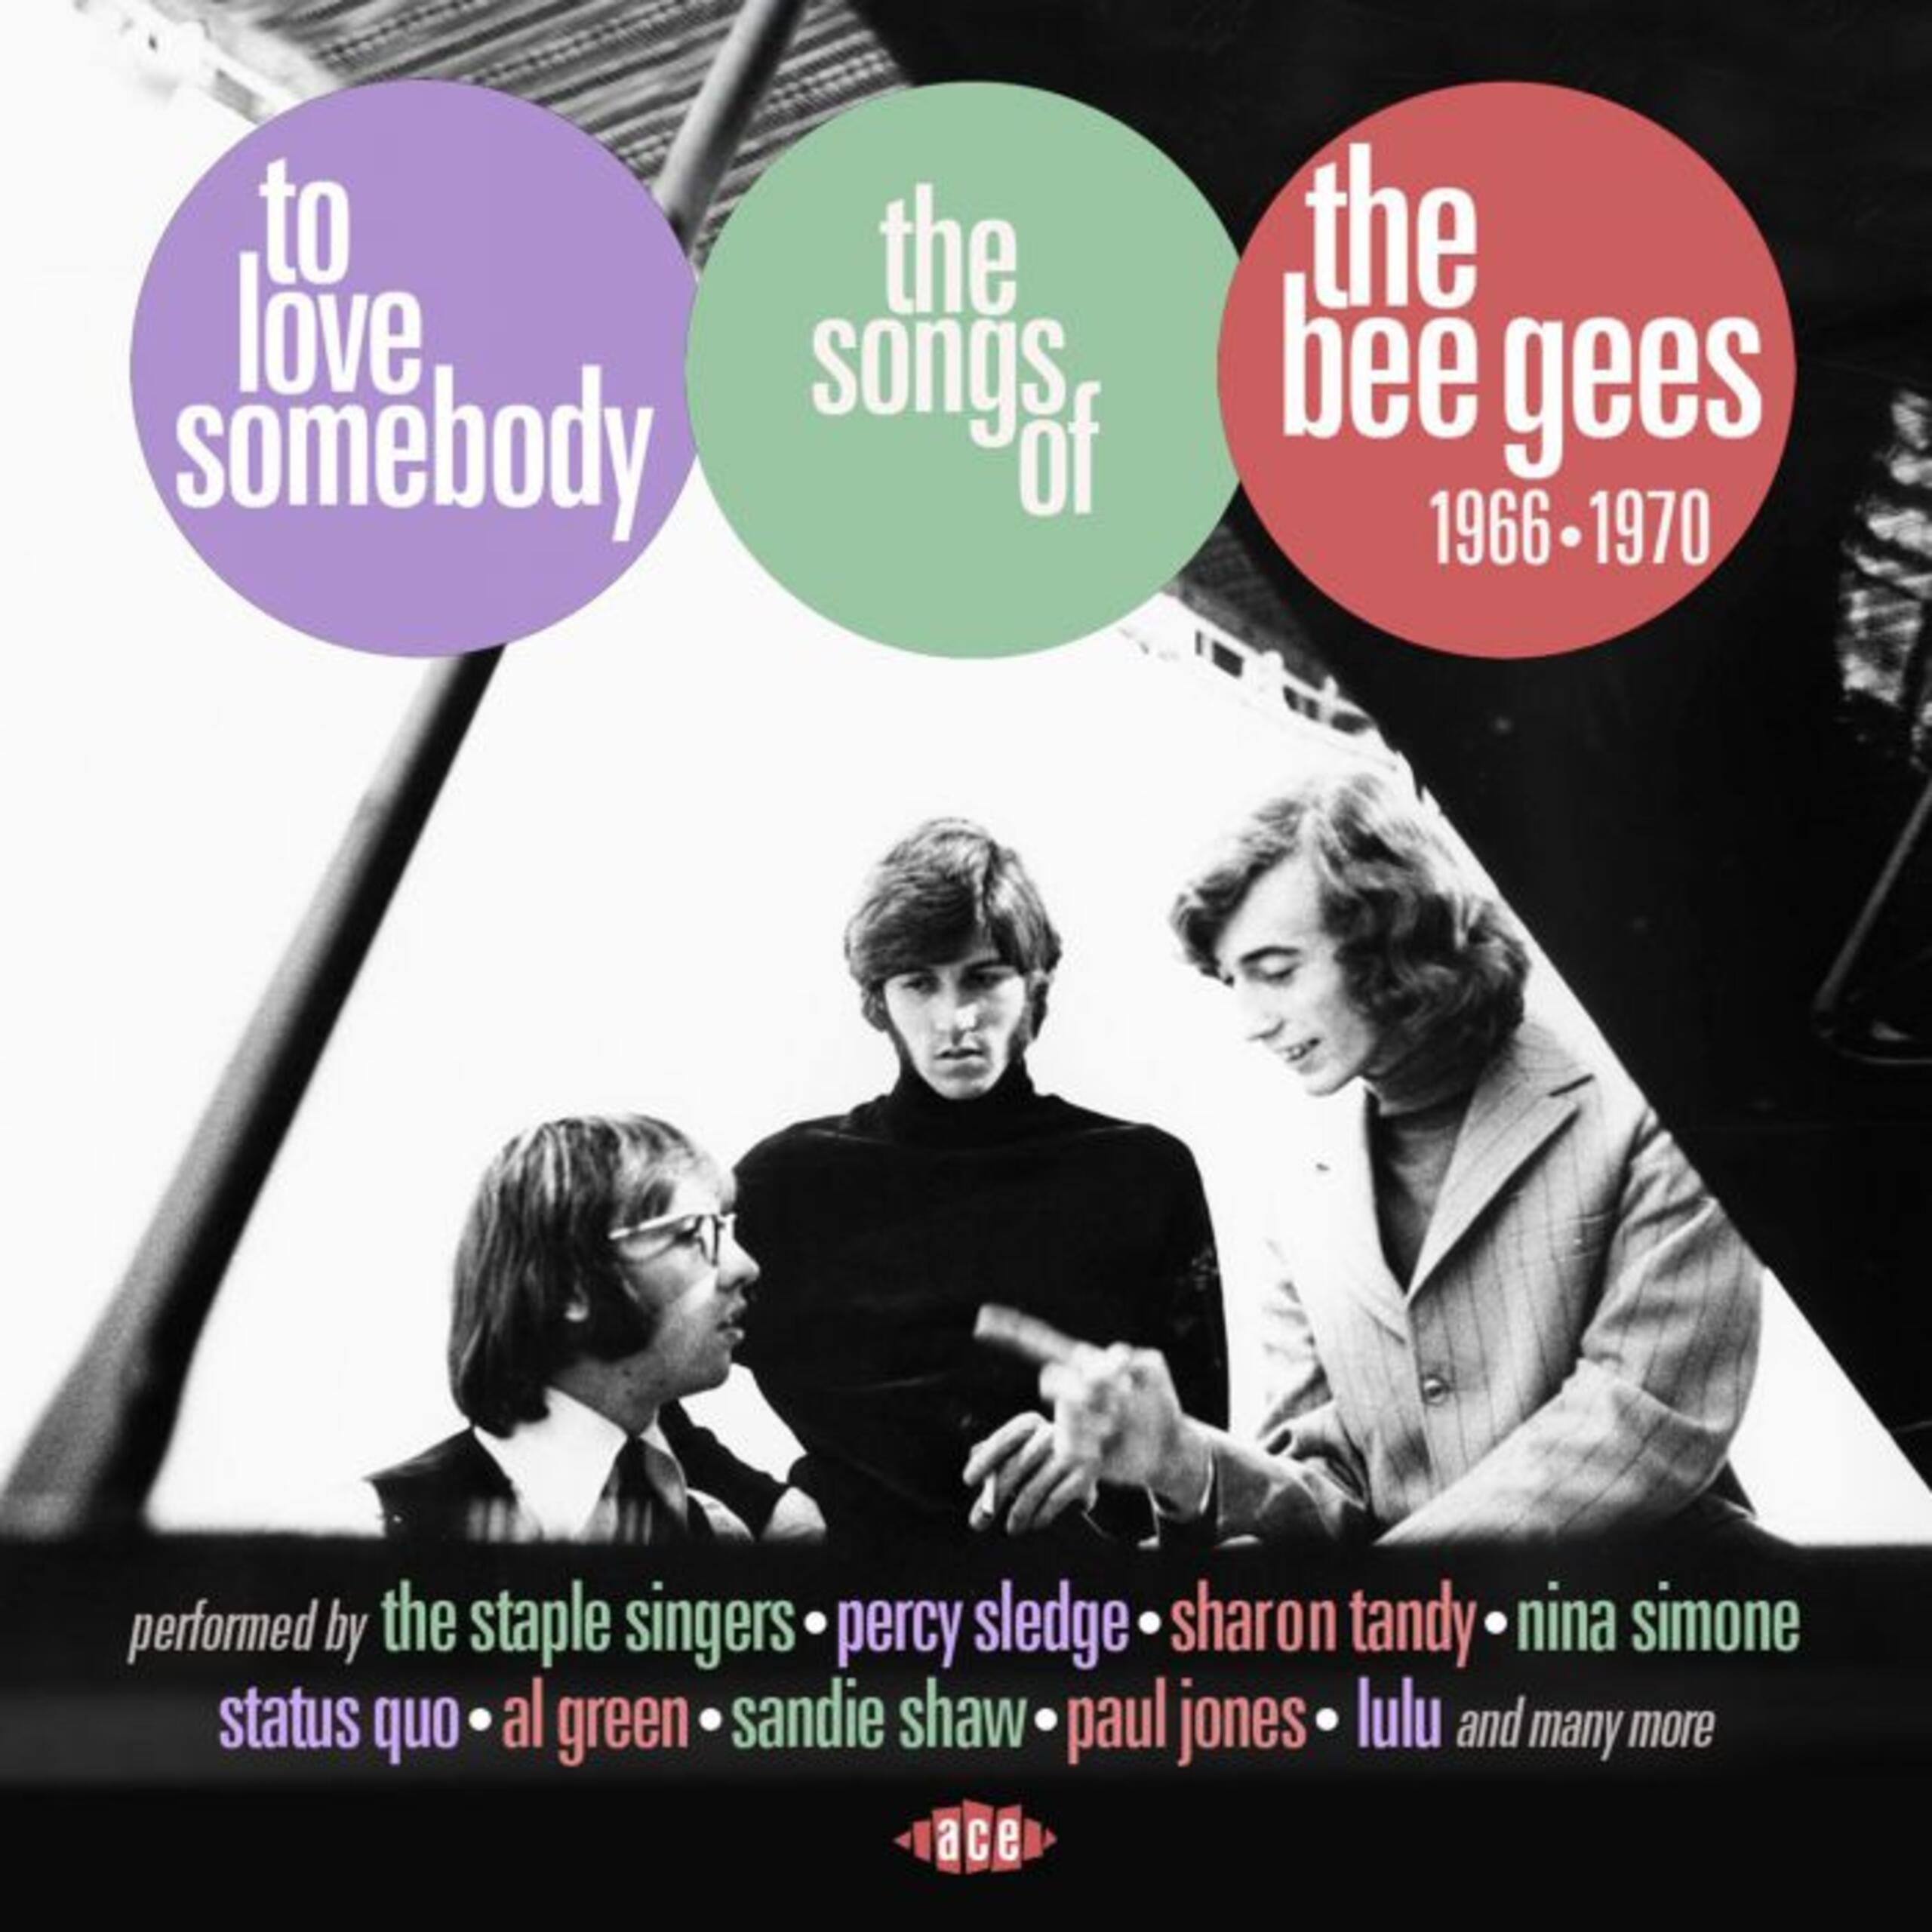 To Love Somebody. The Songs of the Bee Gees 1966-1970 - Bee Gees - CD | IBS